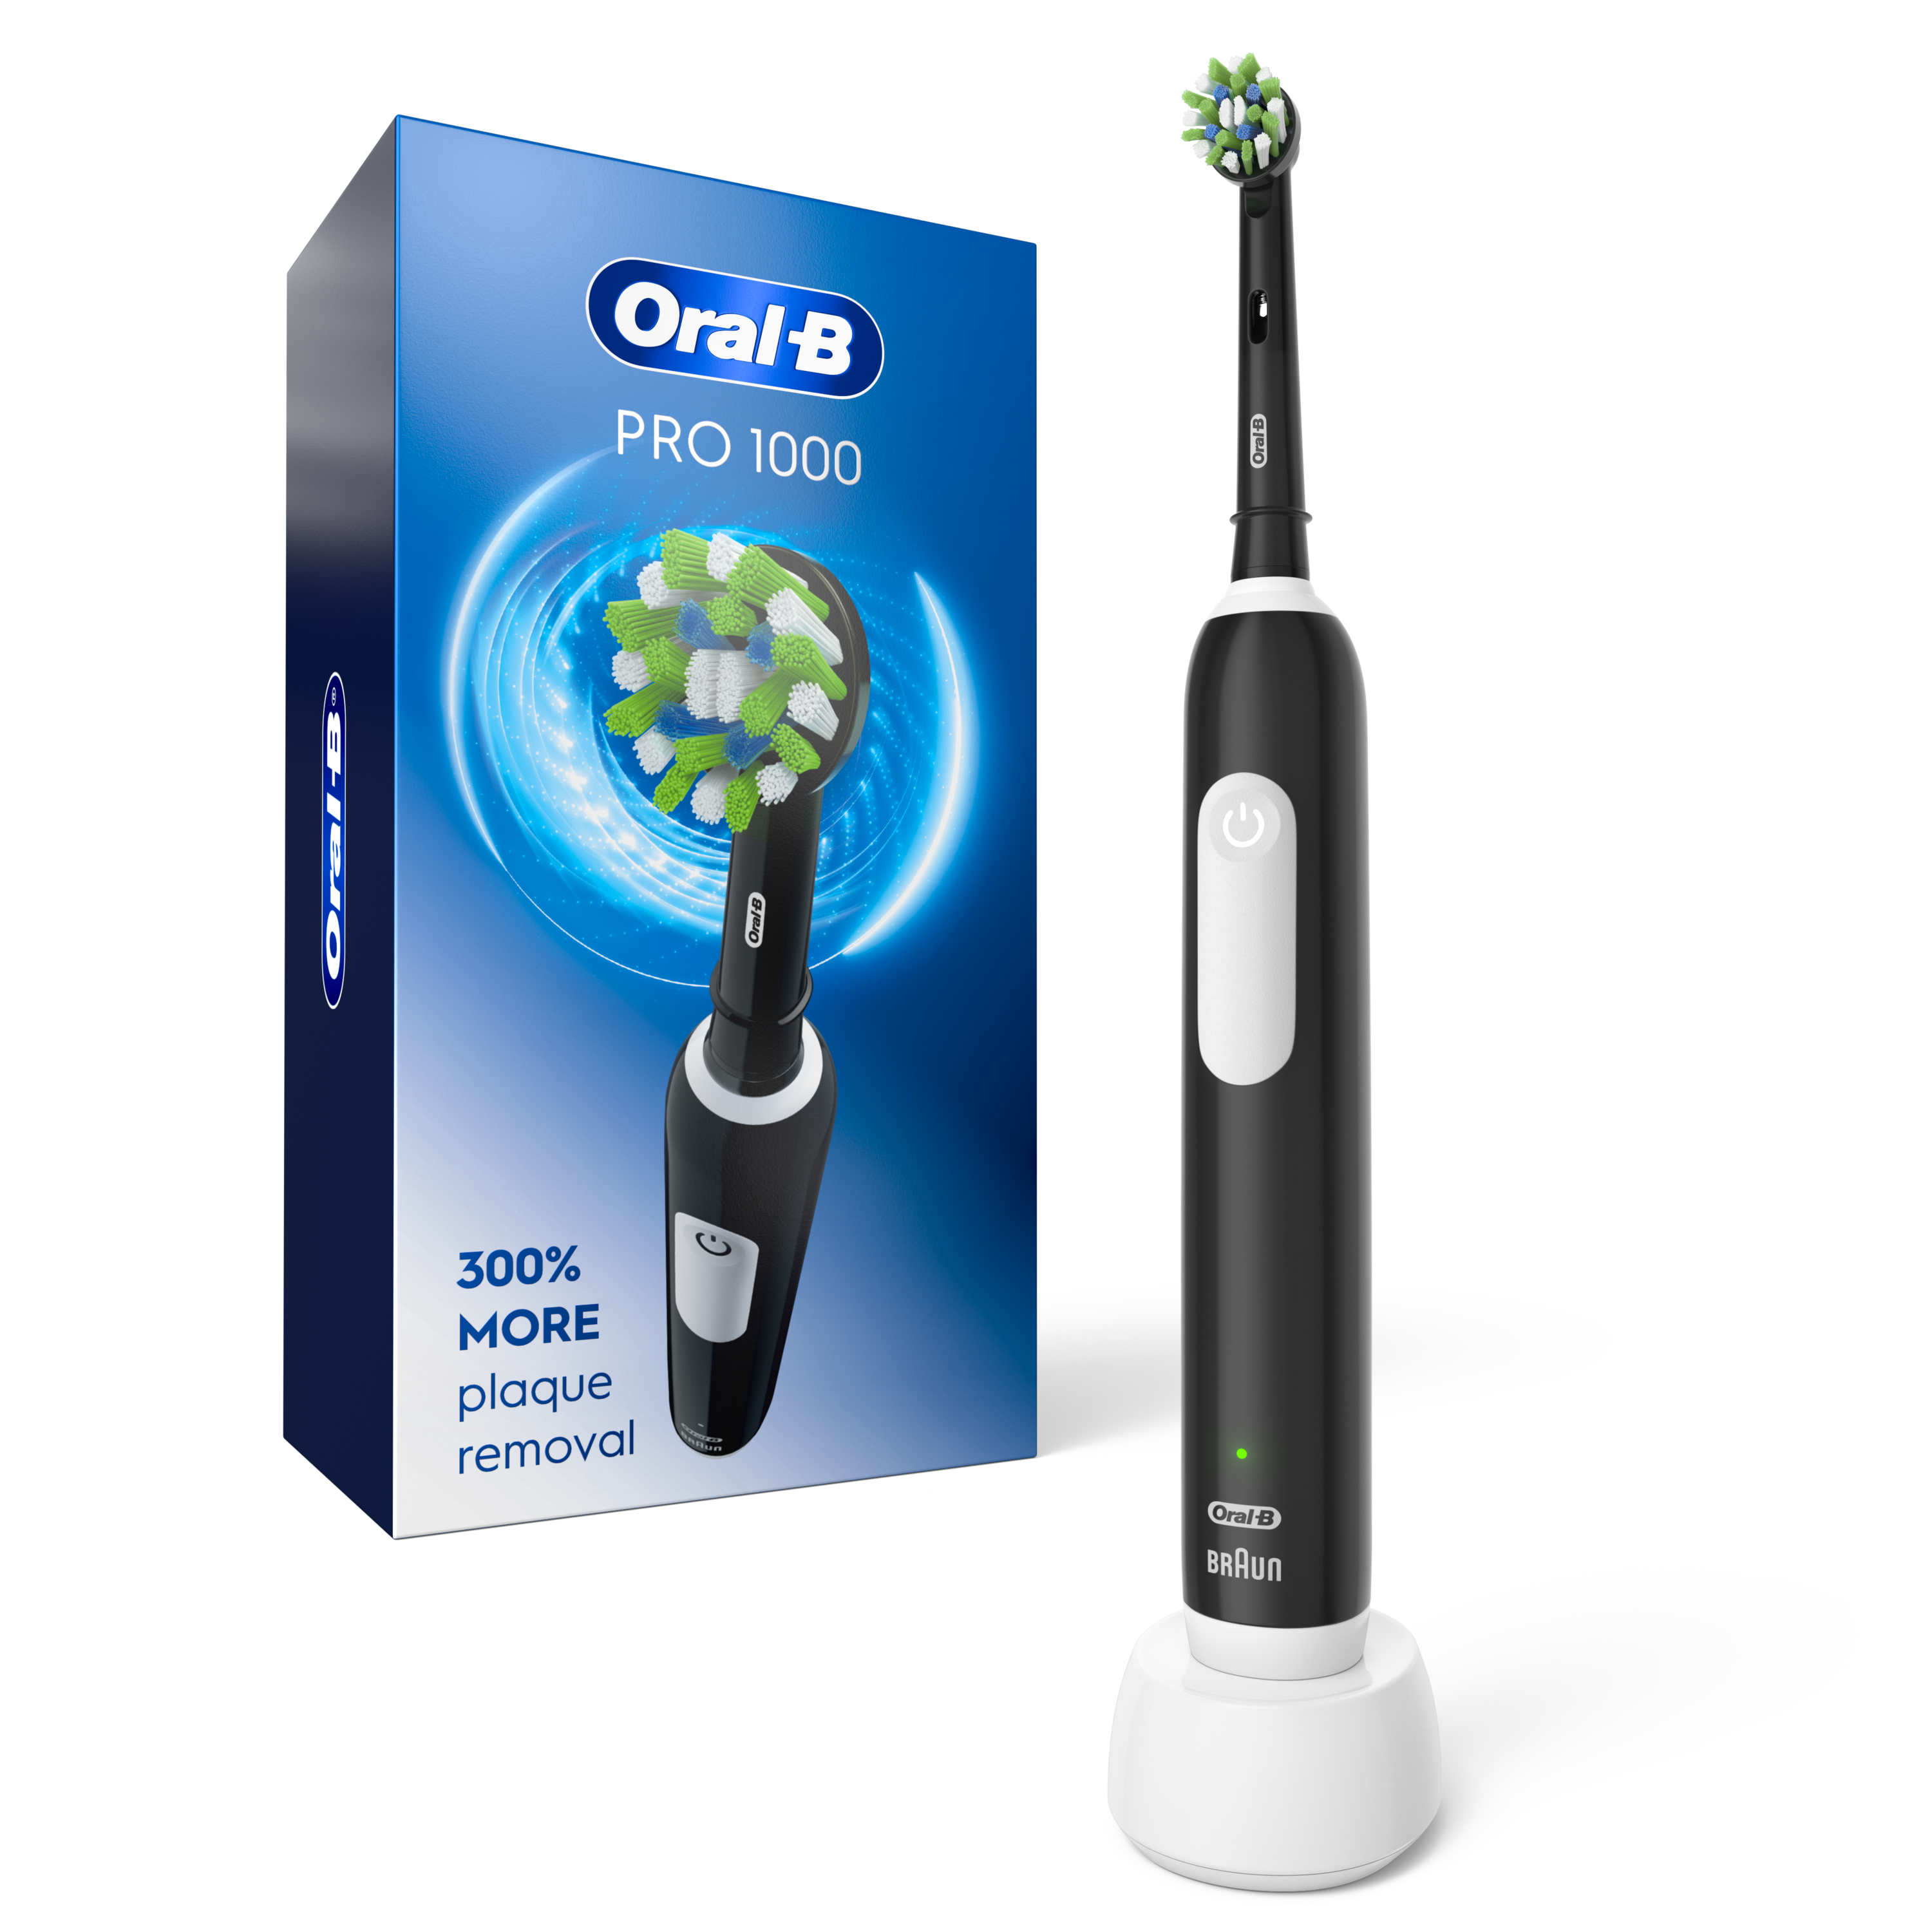 Oral-B Pro 1000 Electric Toothbrush with (1) Brush Head, Rechargeable, Black, for Adults & Children 3+ - image 1 of 7